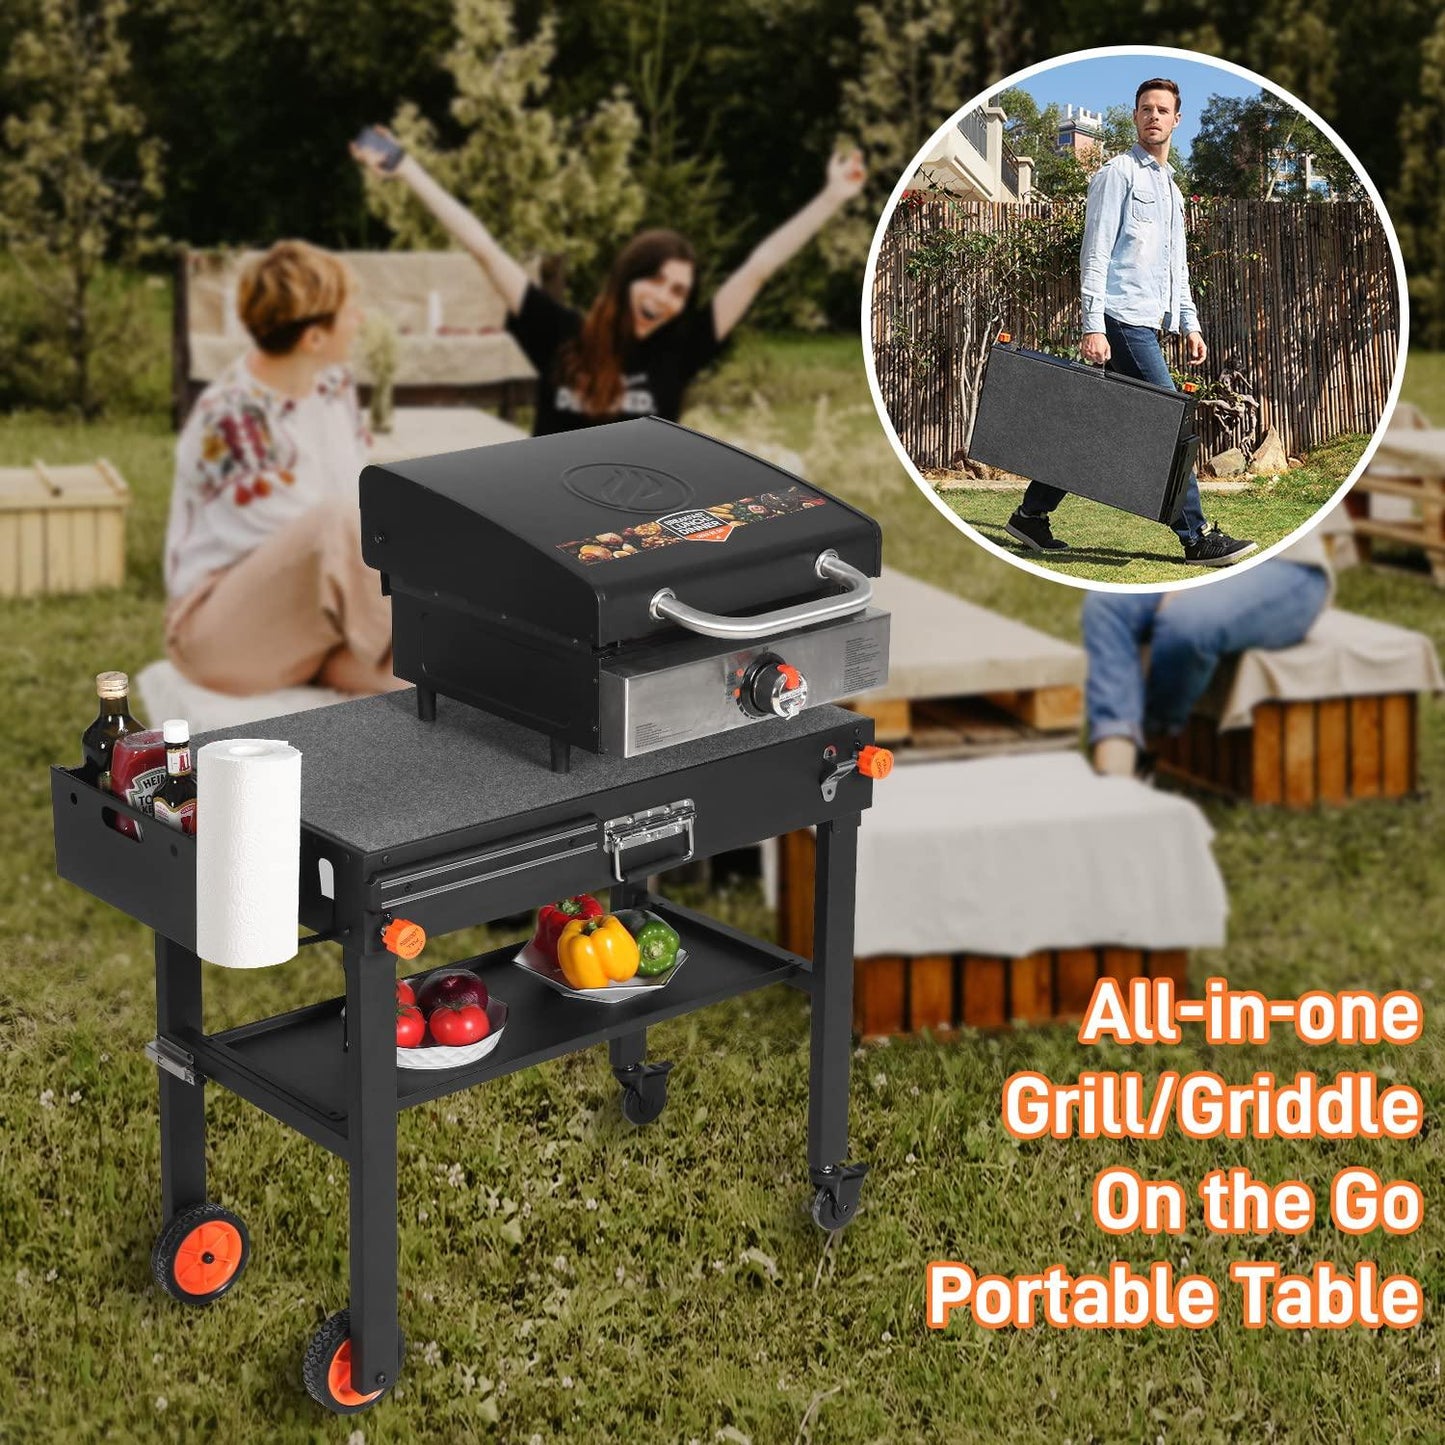 Portable Outdoor Grill Table, Folding Grill Cart Solid and Sturdy, Blackstone Griddle Stand Large Space, Blackstone Table with Paper Towel Holder, Grill Stand for Blackstone Griddle, Ninia Grill etc. - CookCave